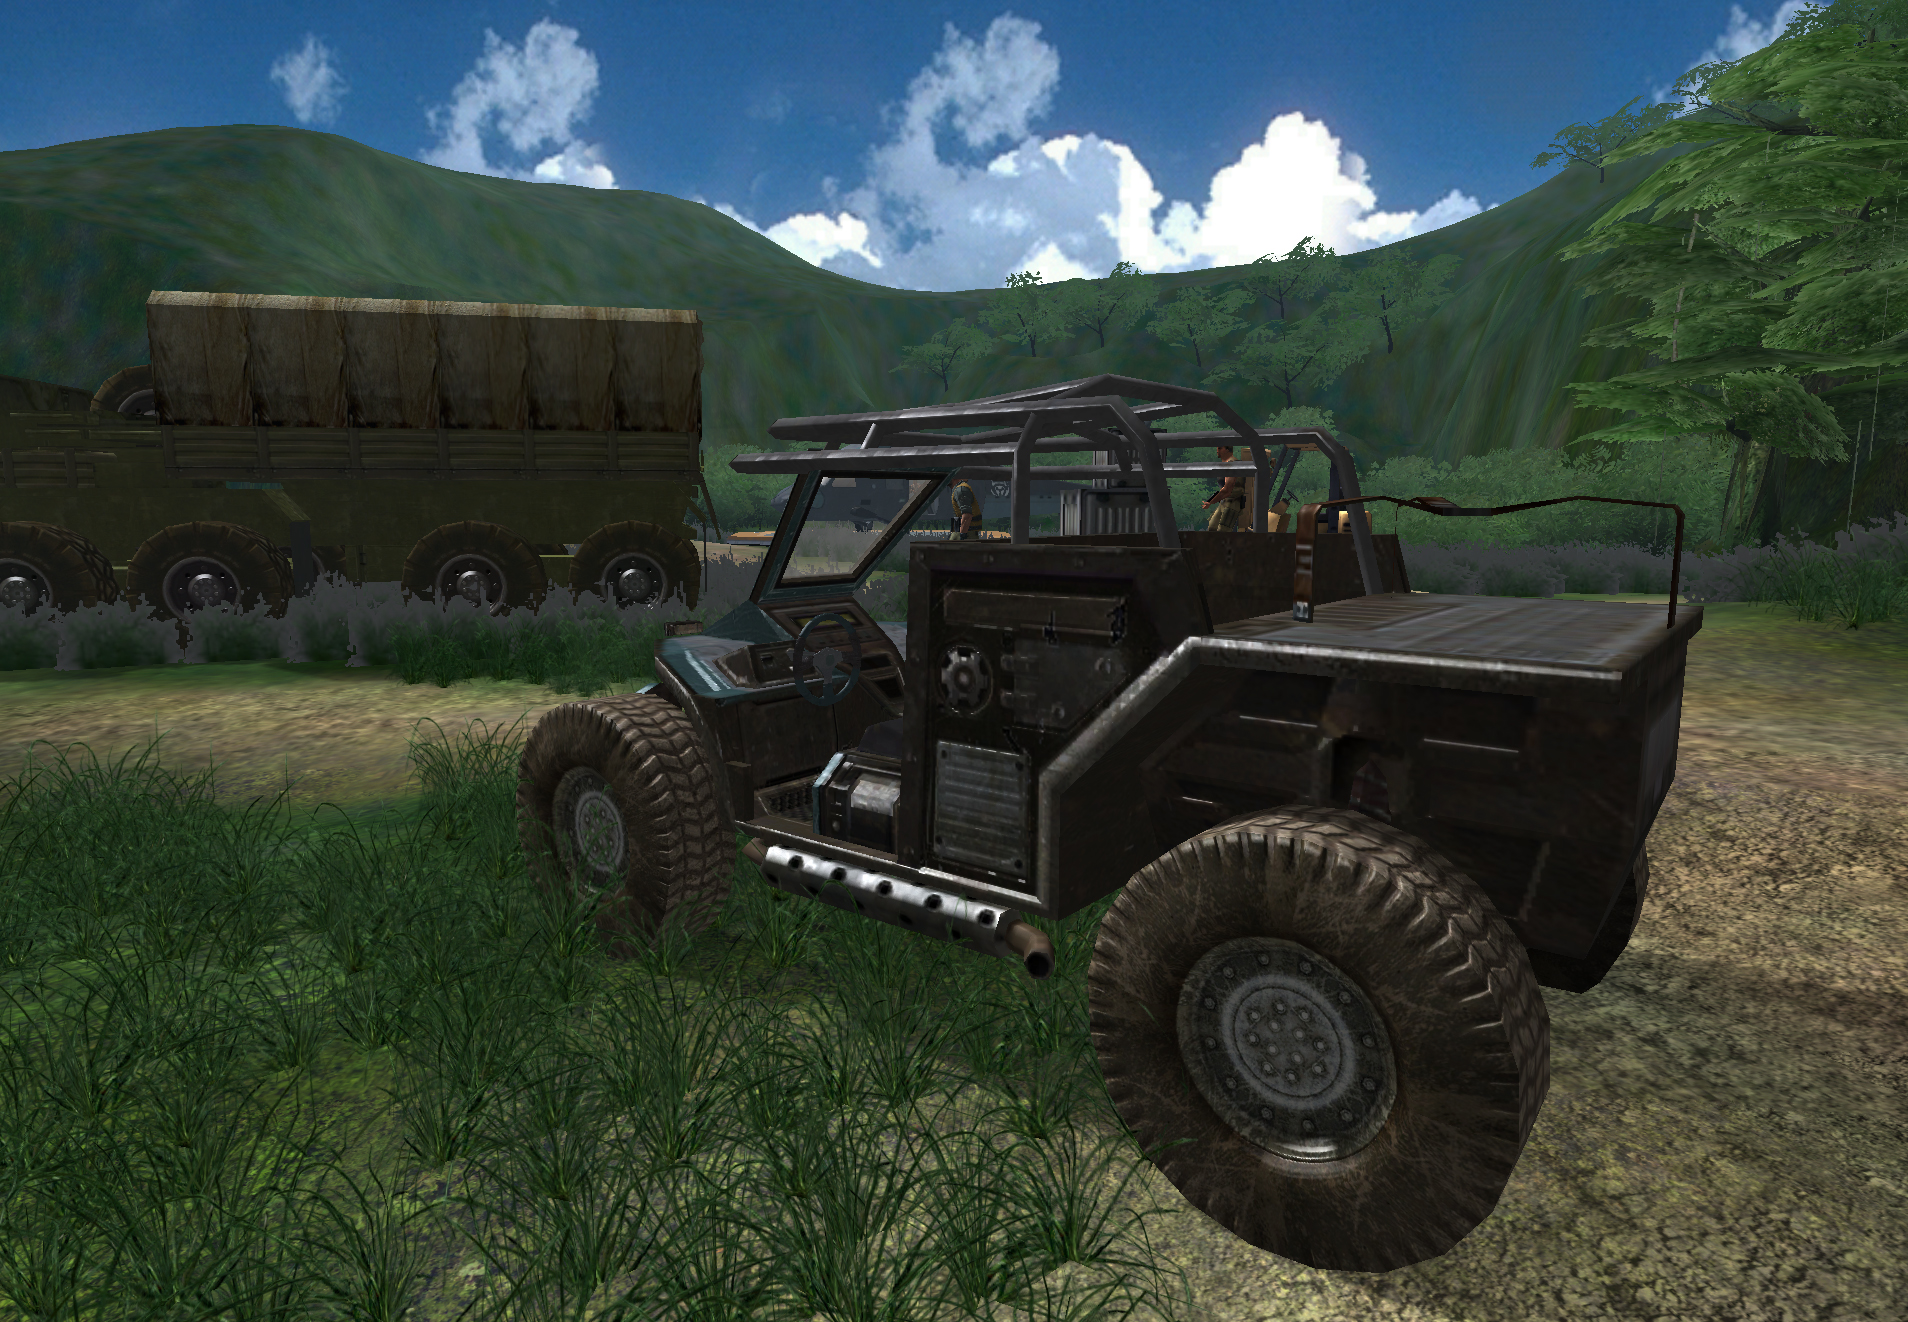 Buggy with a windshield on the front. Pre-release screenshot.